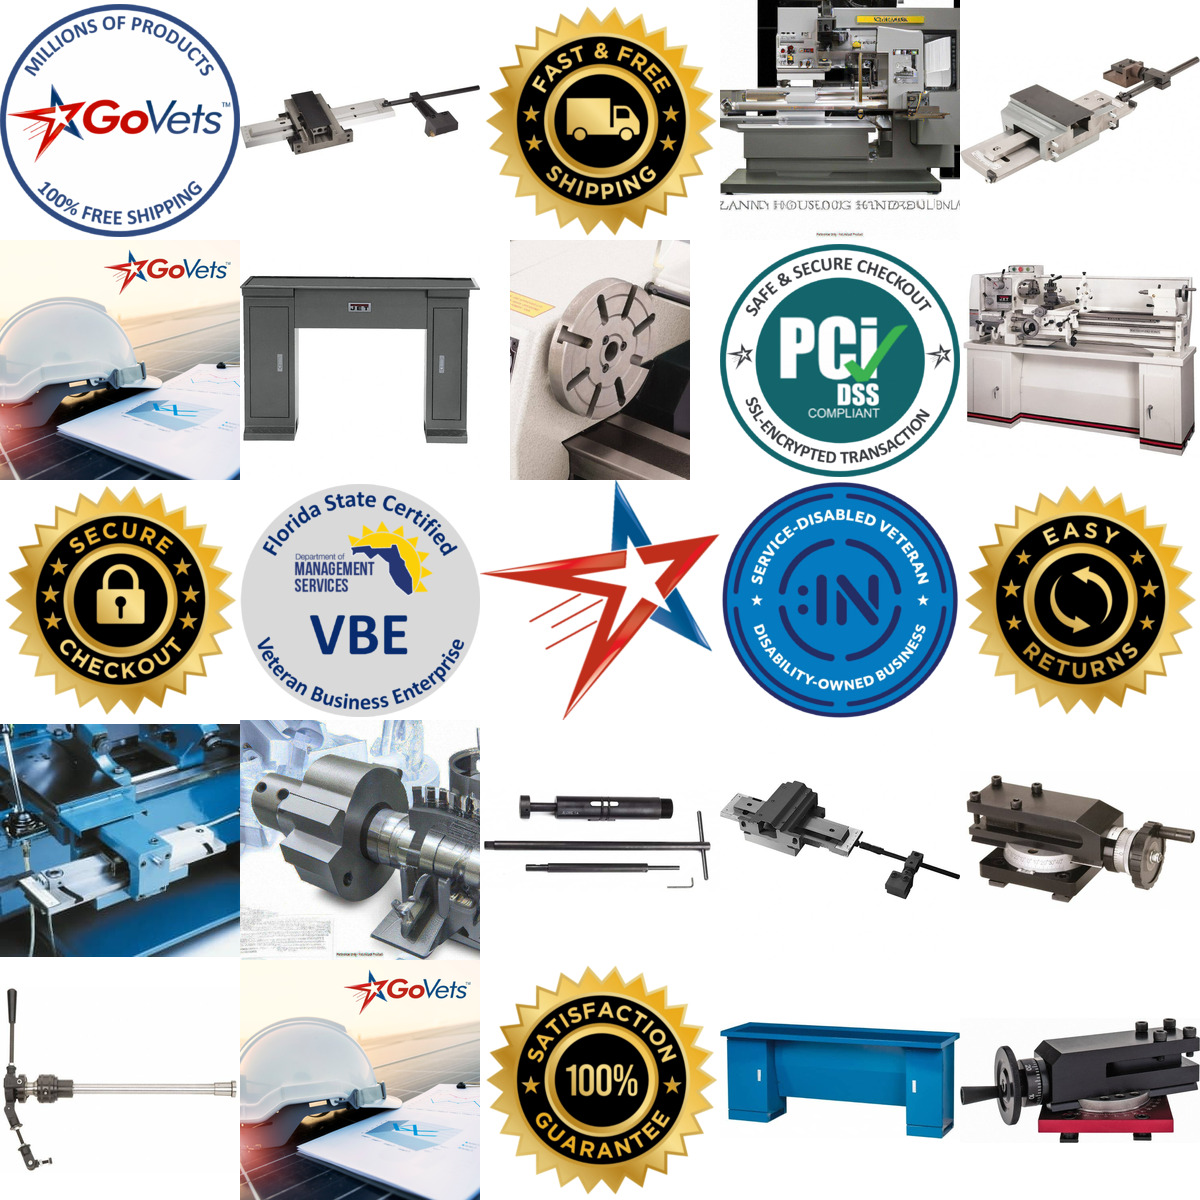 A selection of Lathe Accessories products on GoVets